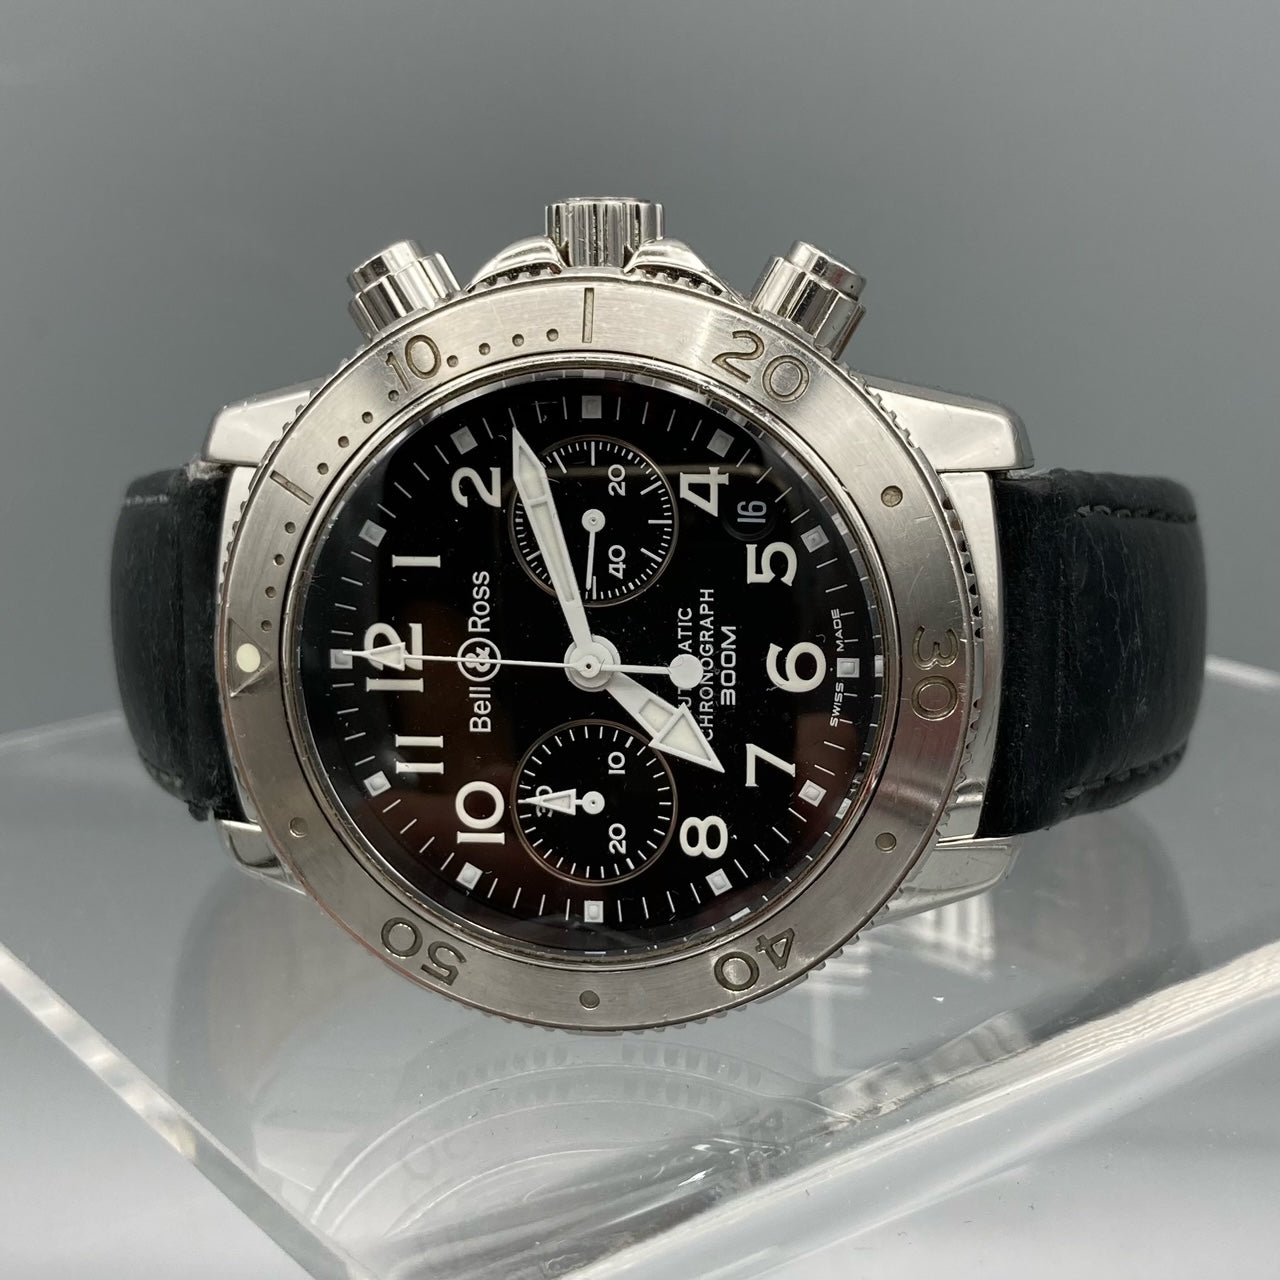 Bell & Ross Chronograph Black Dial 500S Watch - Diver 300